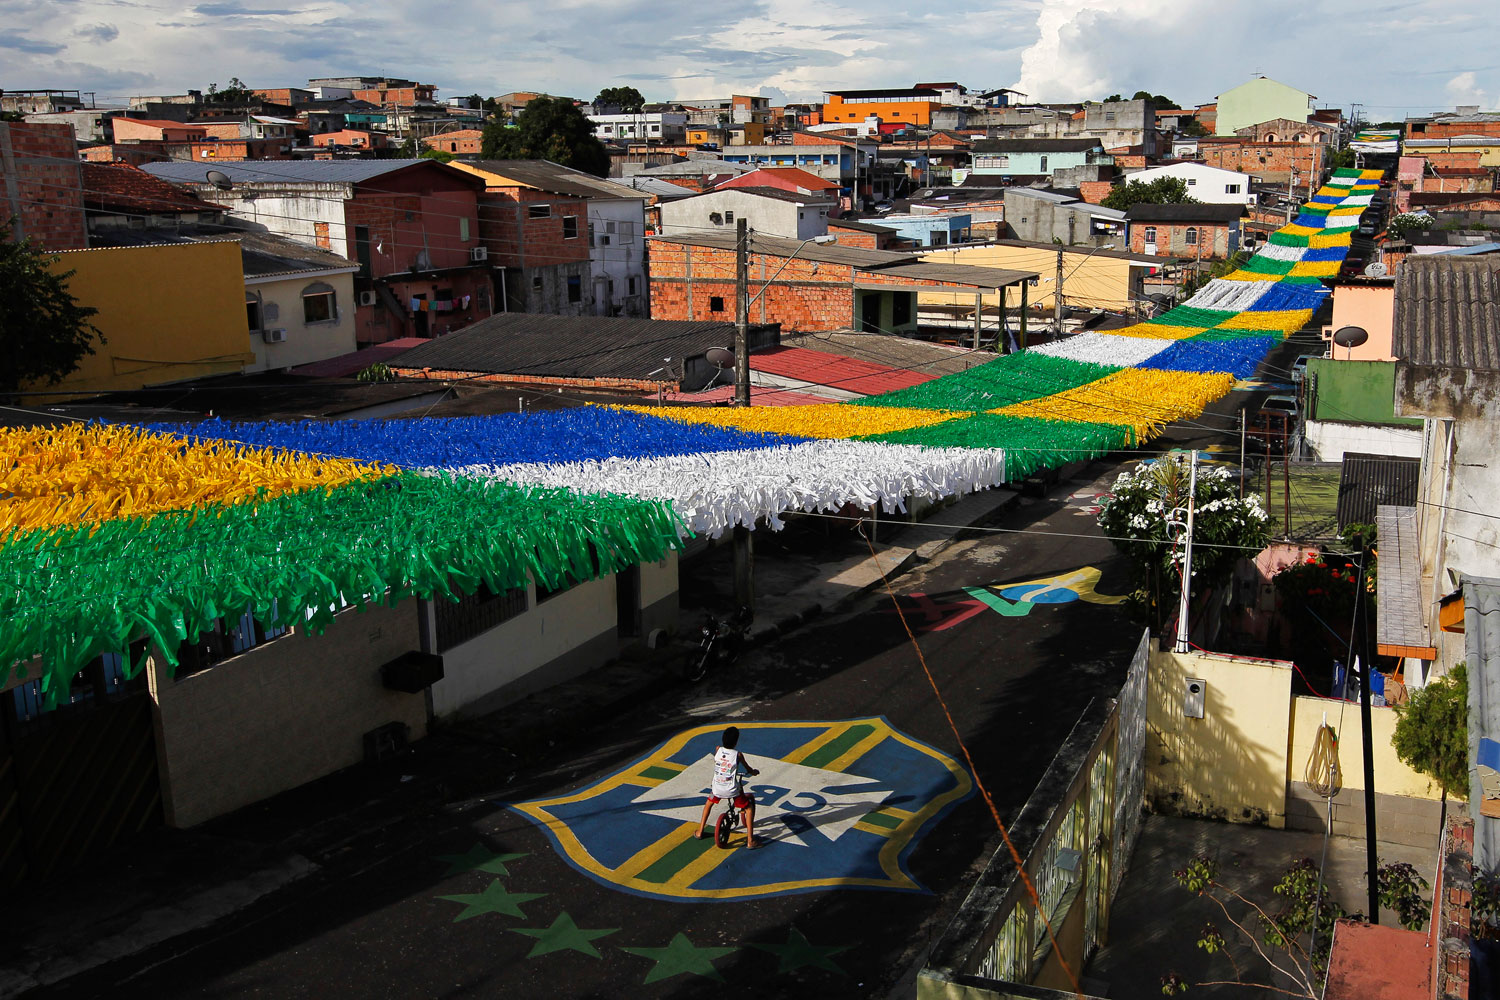 The Third Street of the Alvorada neighborhood, part of Brazil's southernmost state Rio Grande do Sul, is vibrantly decorated for the 2014 World Cup in Manaus, one of the tournament's 12 host cities.